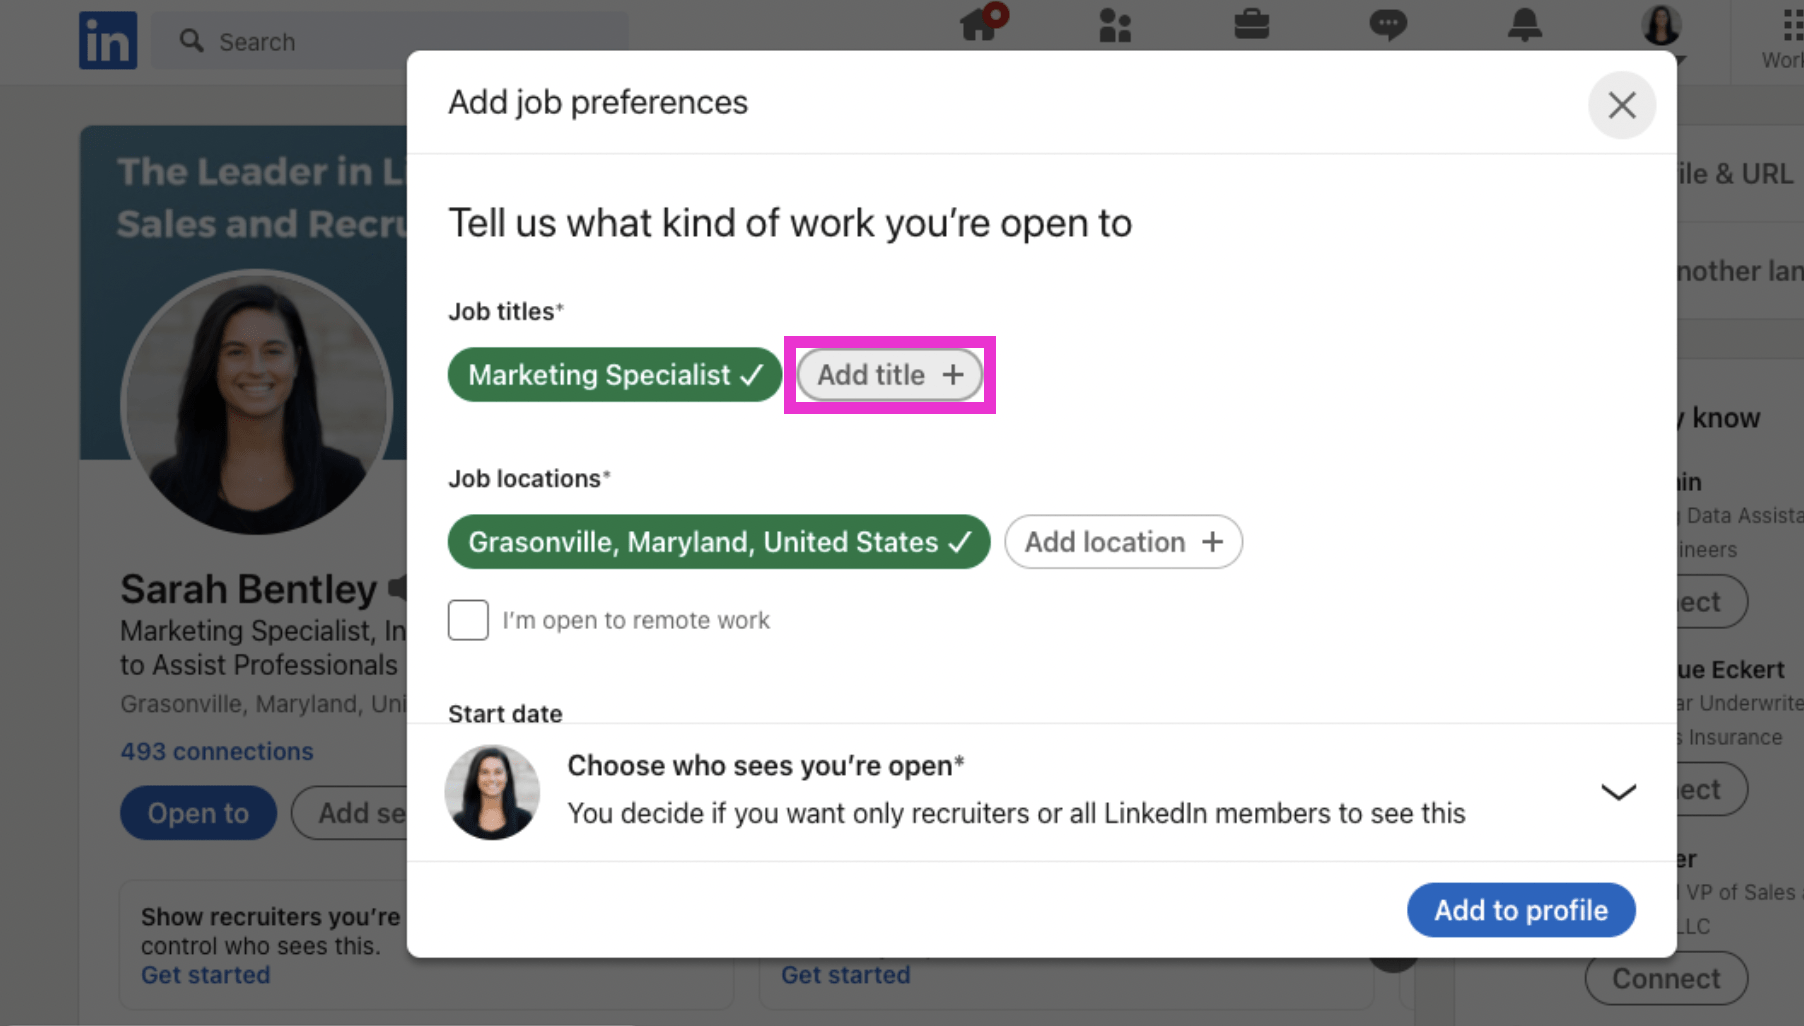 How to Add Job Preferences to Your LinkedIn Profile